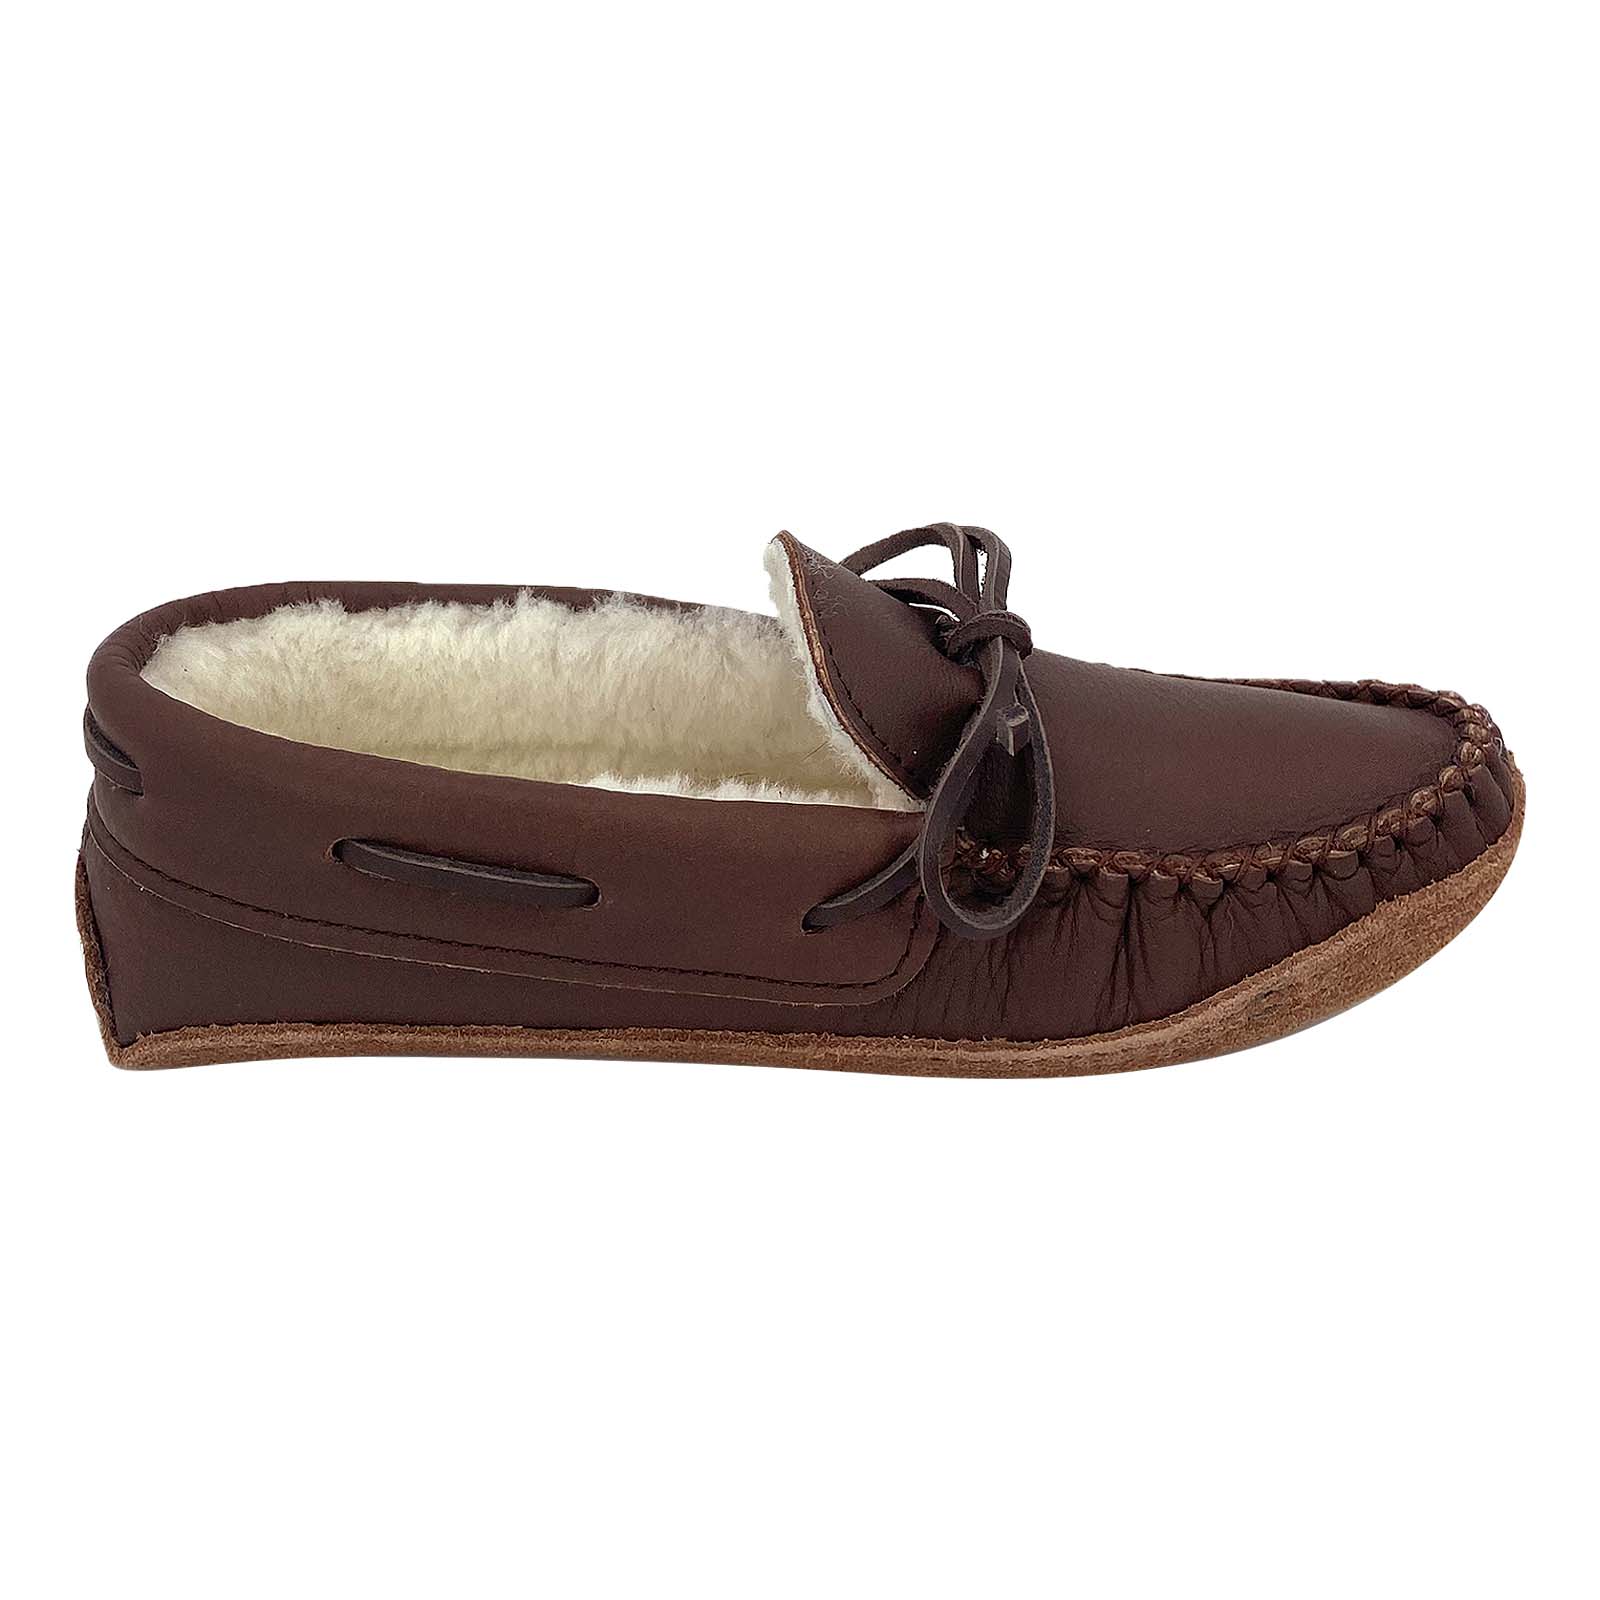 Women's Lined Moose Hide Leather Moccasins